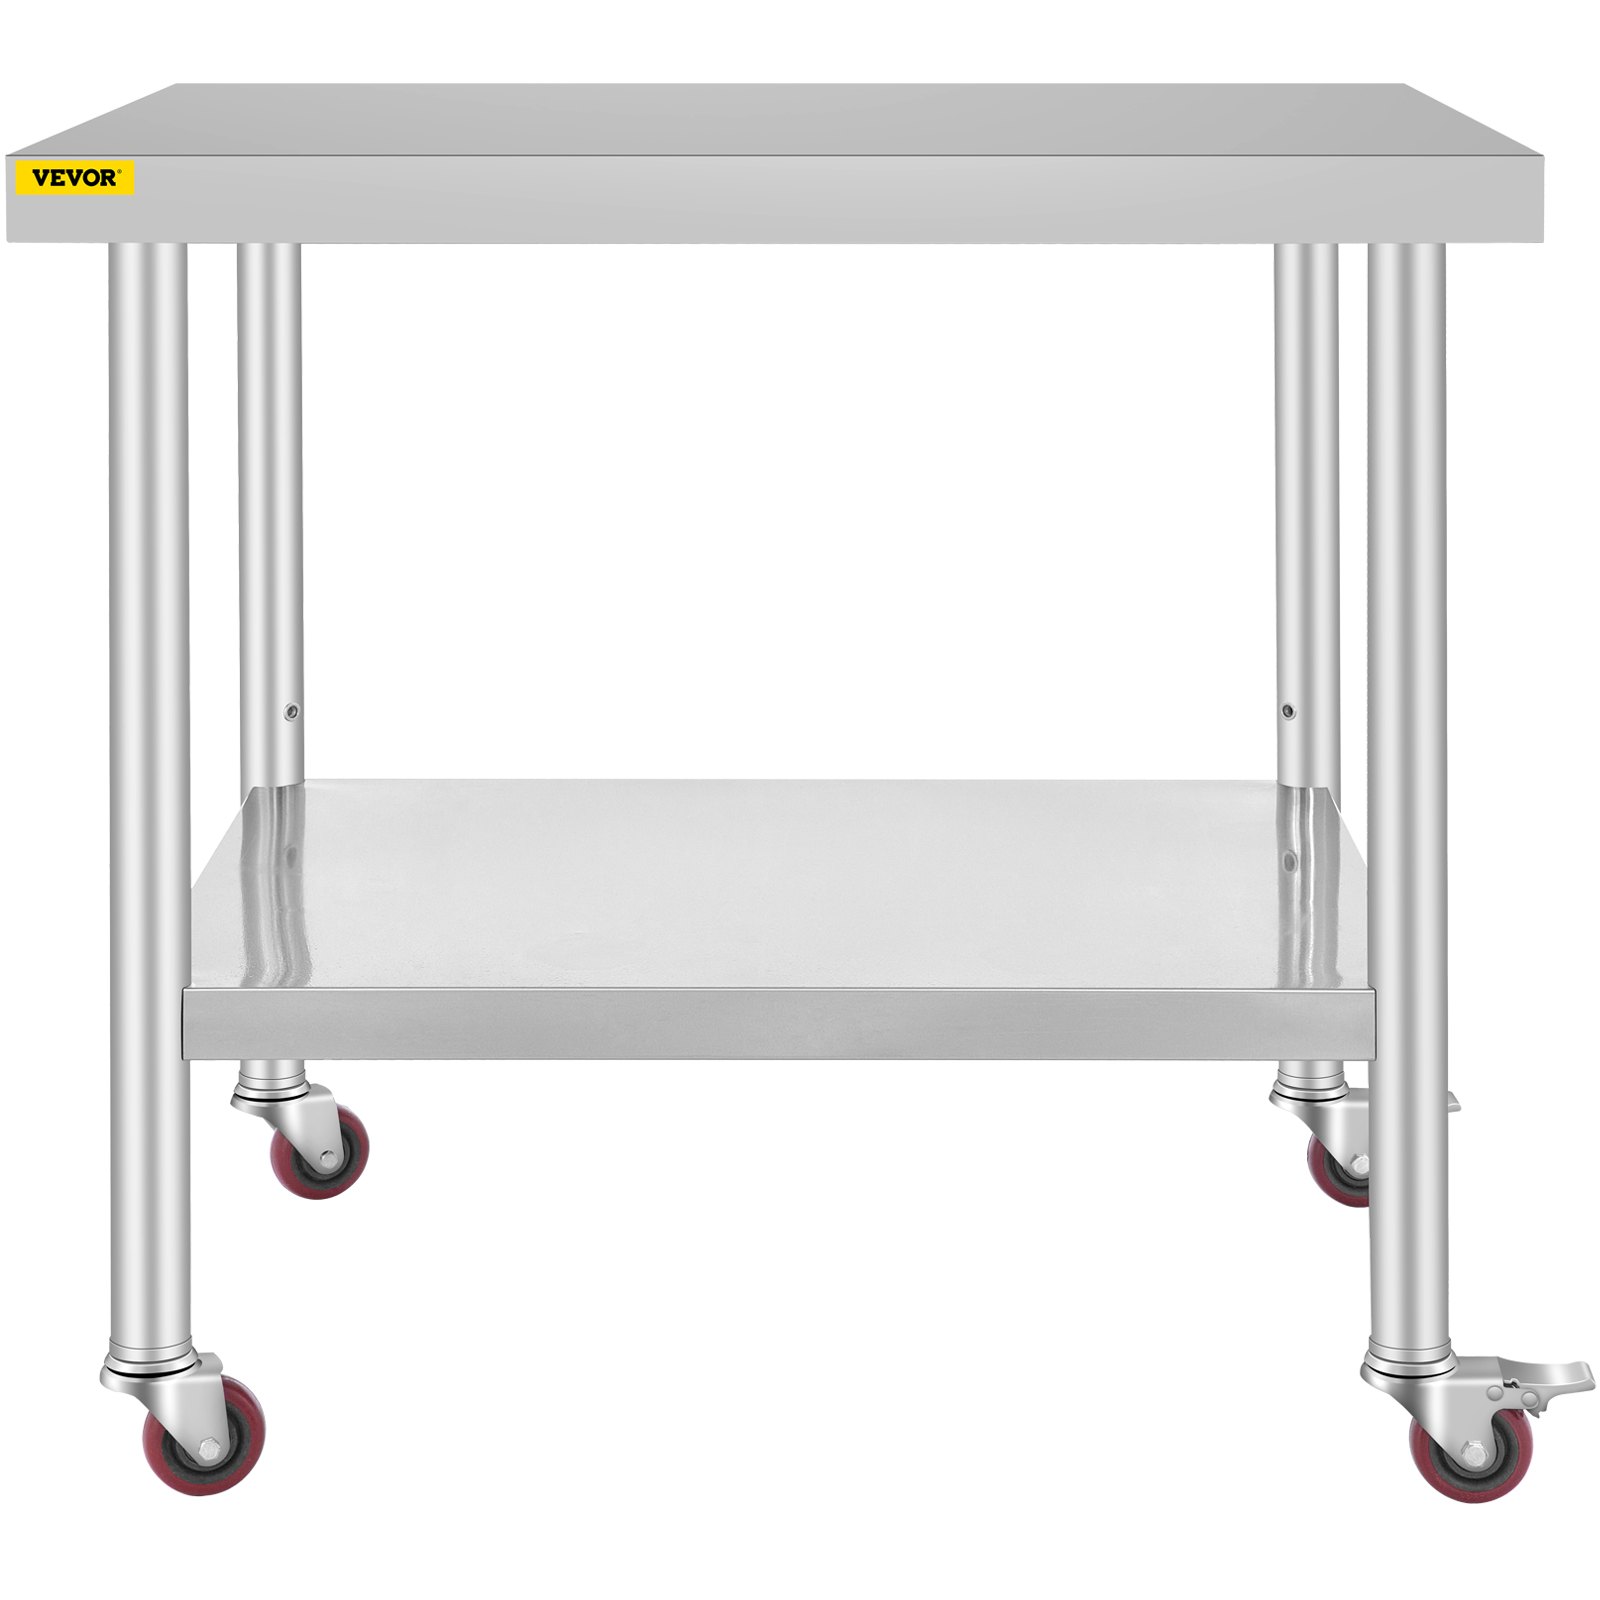 VEVOR 30x36x34 Inch Stainless Steel Work Table 3-Stage Adjustable Shelf ...